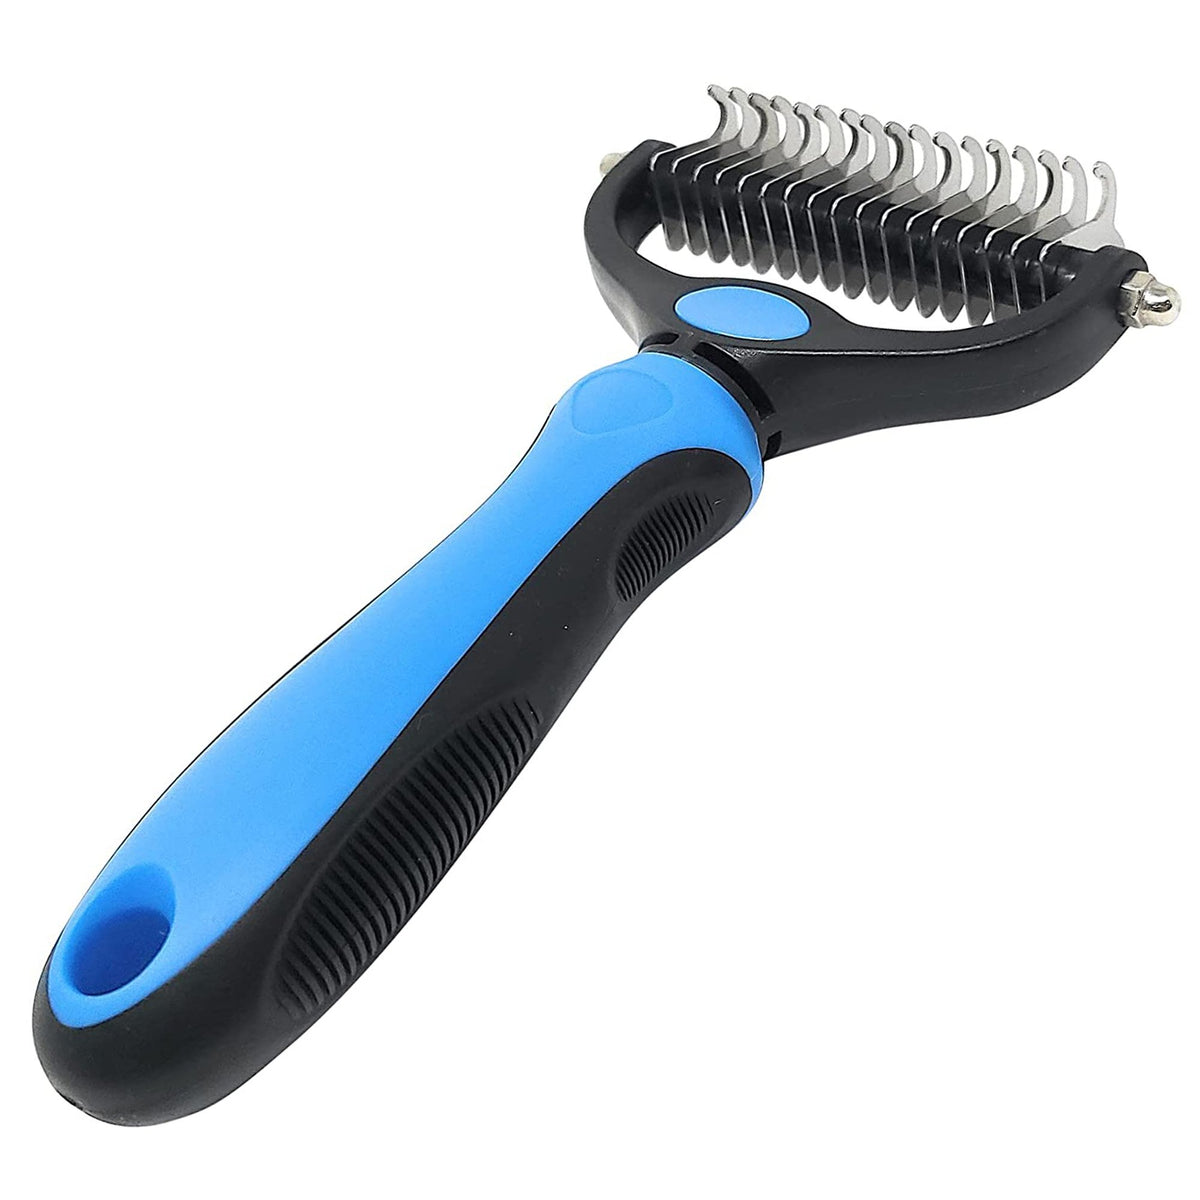 MARS WELLNESS Pet Grooming Brush - Double Sided Shedding and Dematting Tool  for Cats and Dogs - Large - Mars Med Supply